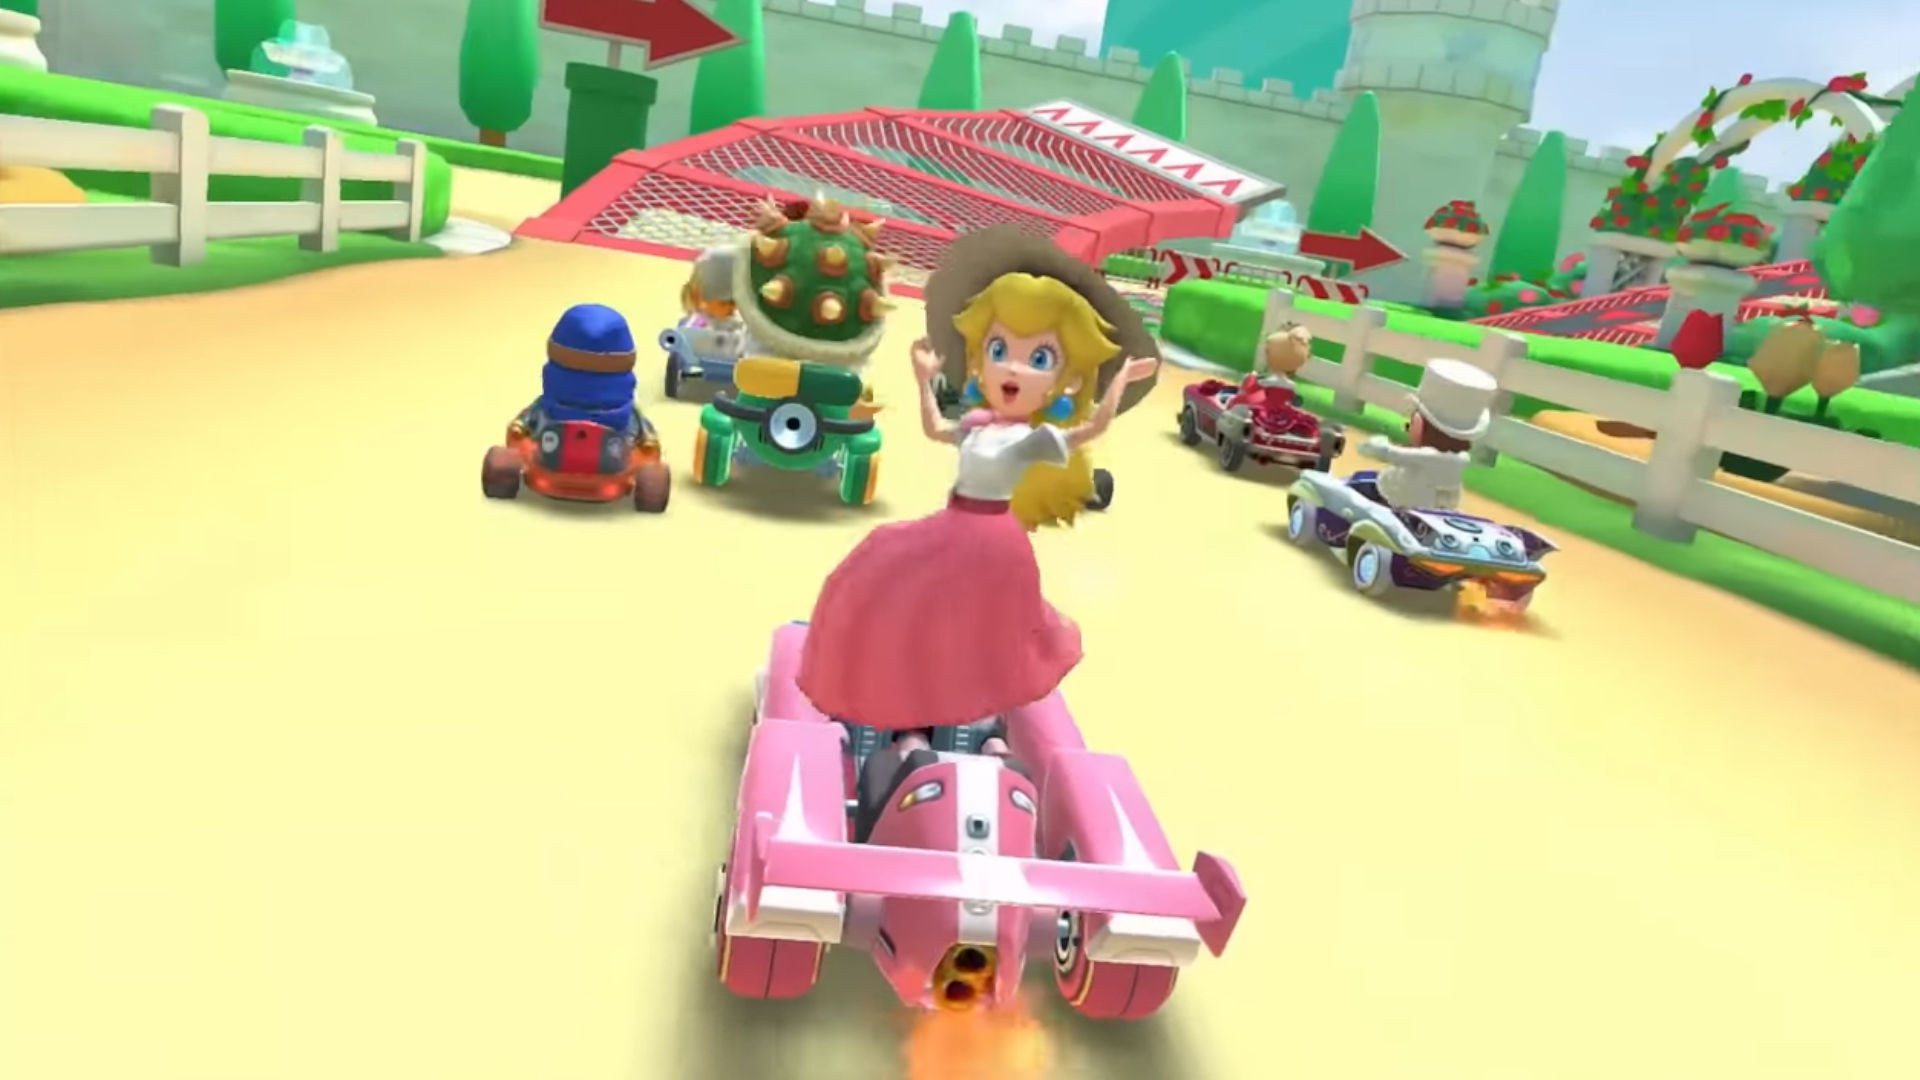 Mario Kart Tour Peach versus Bowser event asks you to pick a side